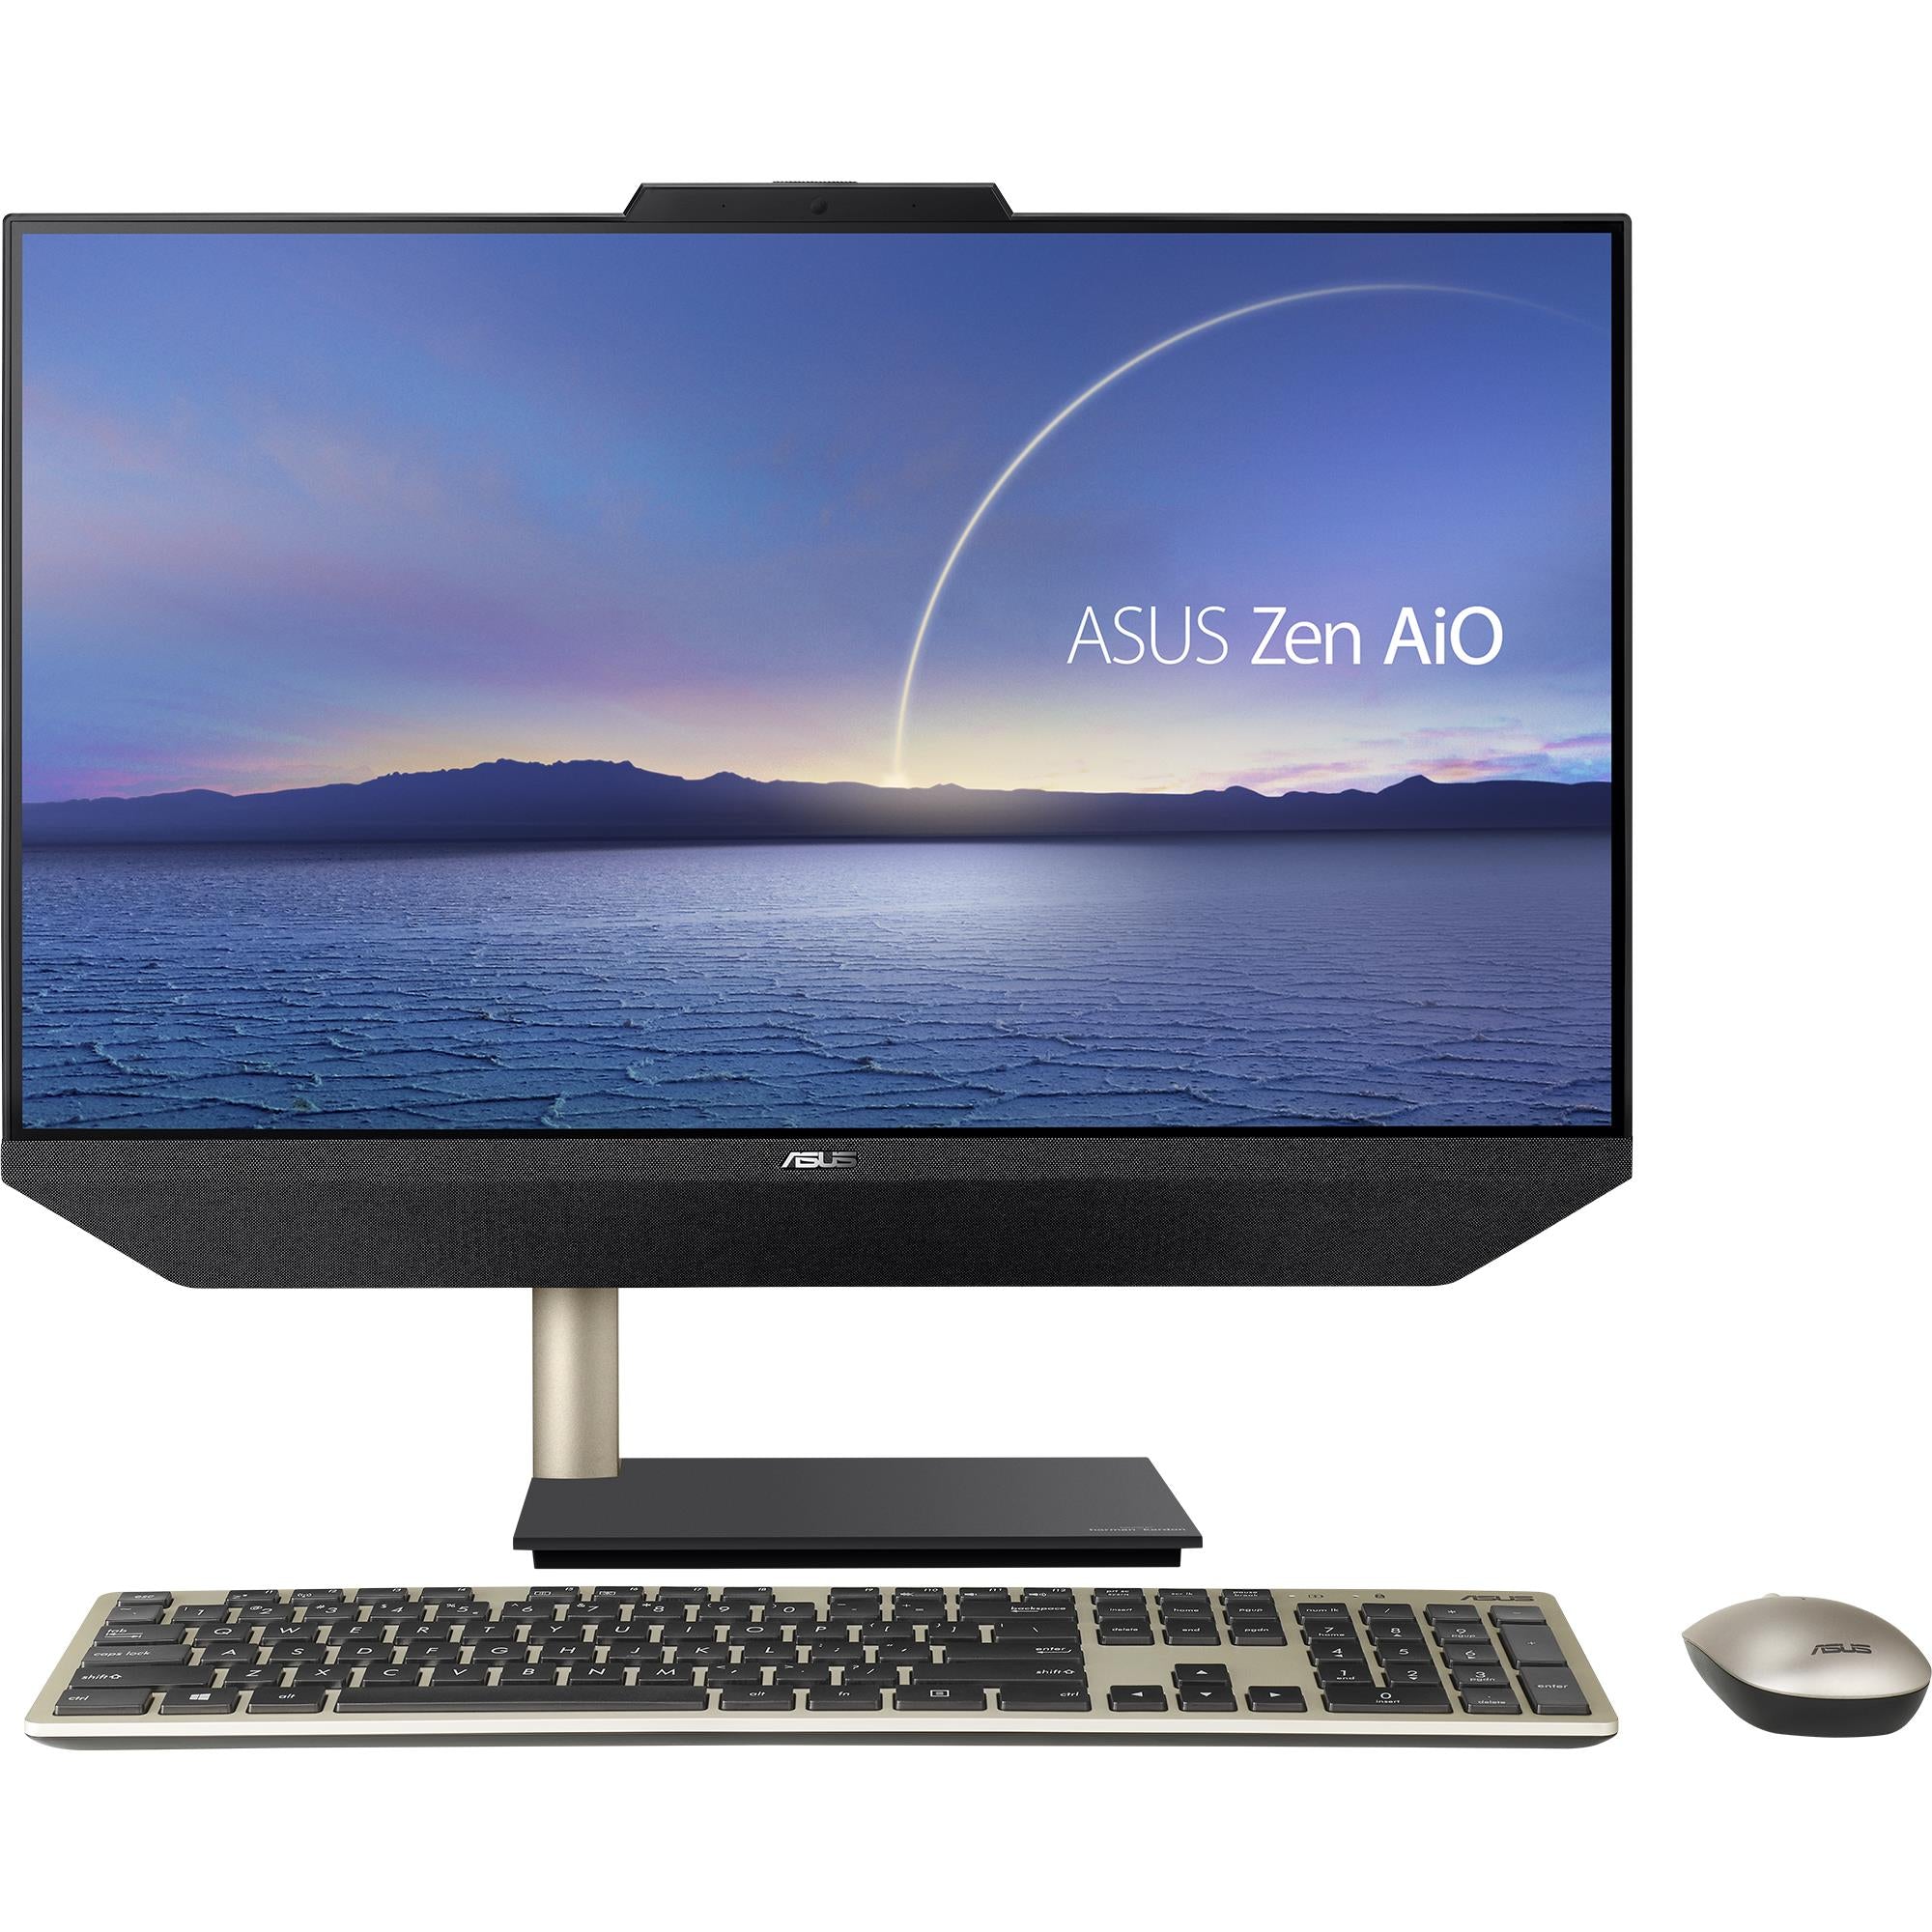 asus zen aio 23.8" fhd all-in-one pc (512gb) [intel i7]